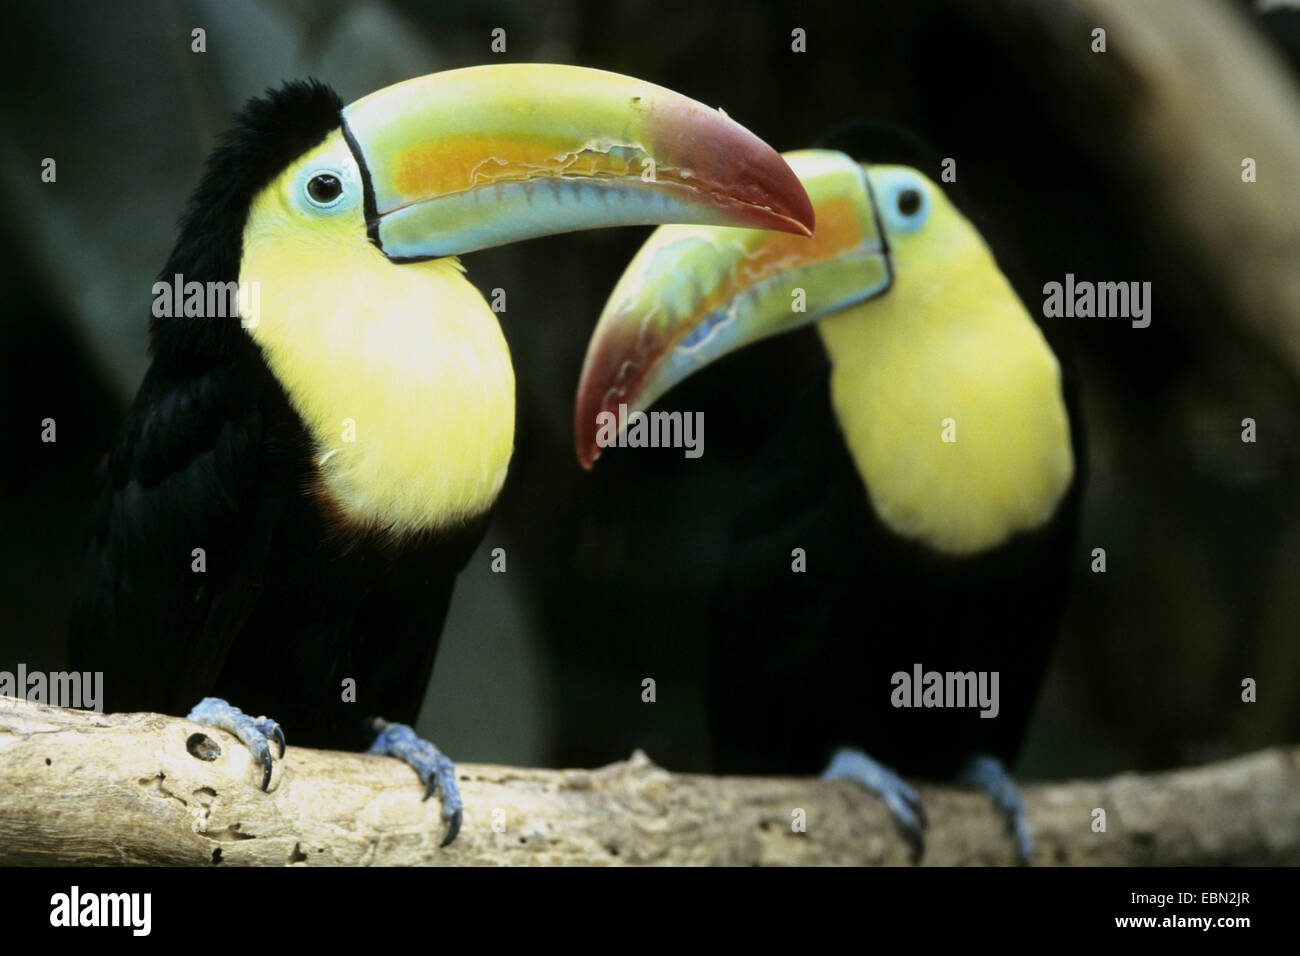 keel-billed toucan (Ramphastos sulfuratus), two keel-billed toucans on a branch Stock Photo